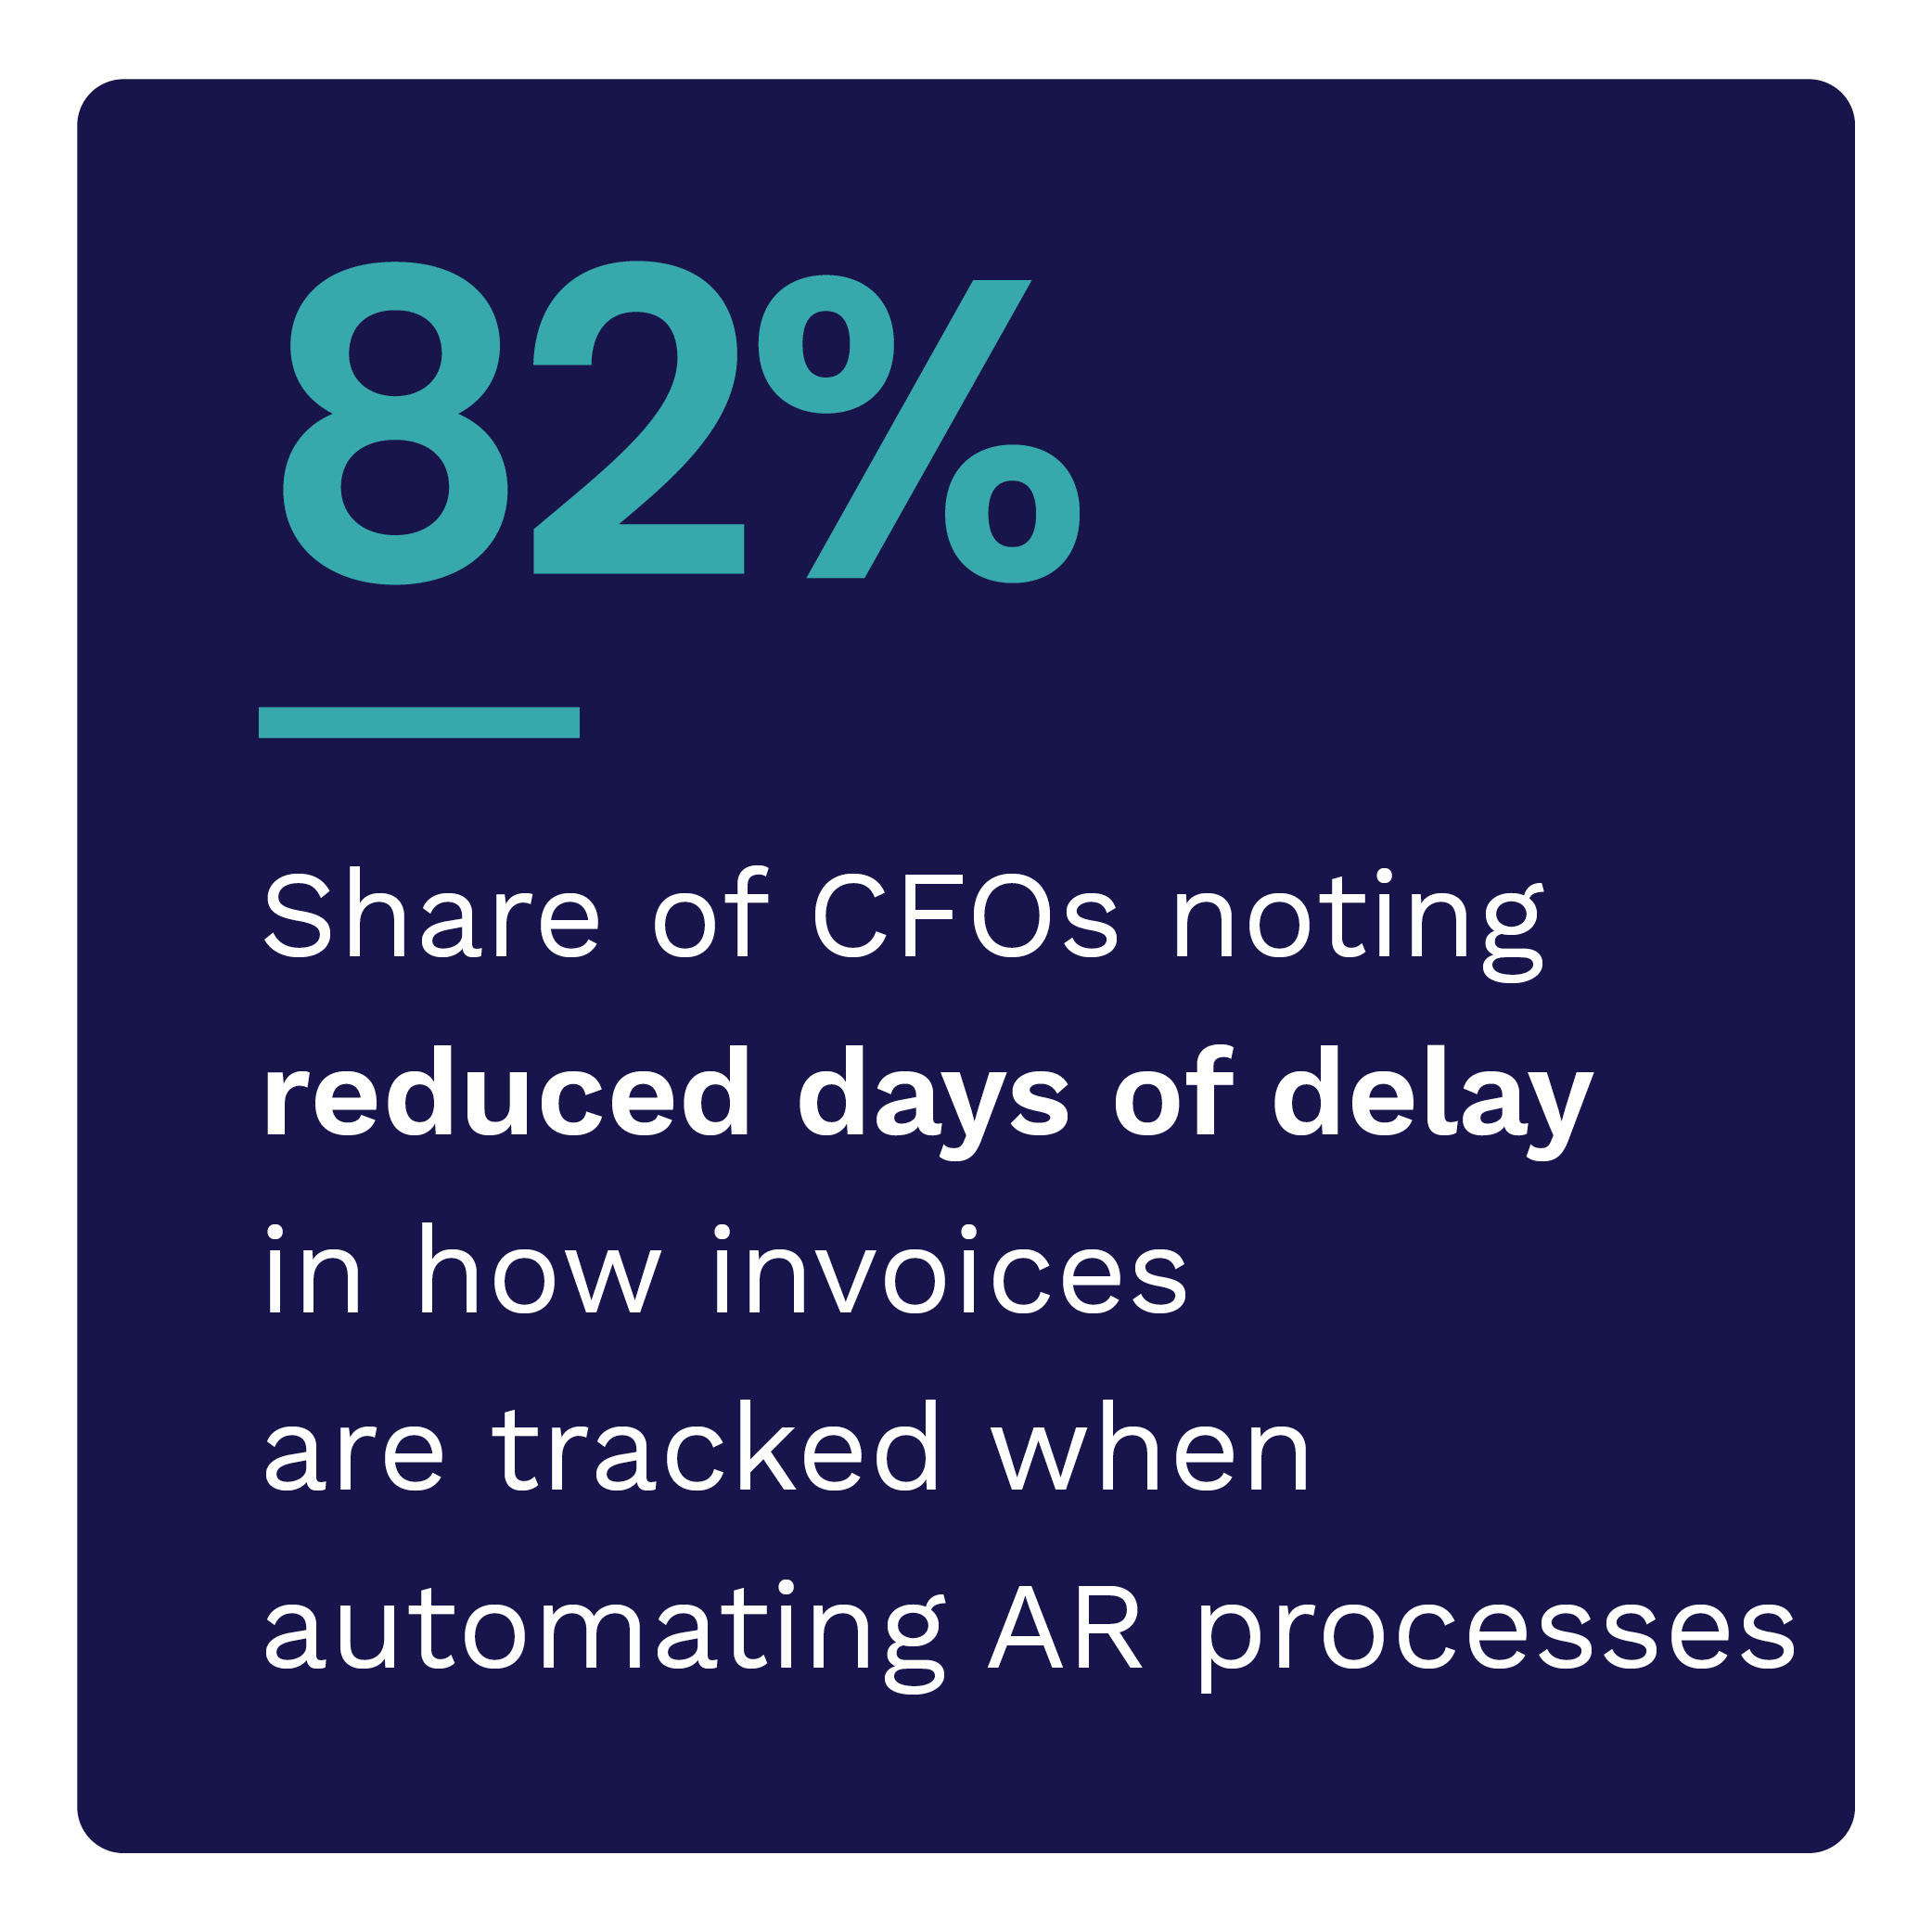 82% Share of CFOs noting reduced days of delay in how invoices are tracked when automating AR processes